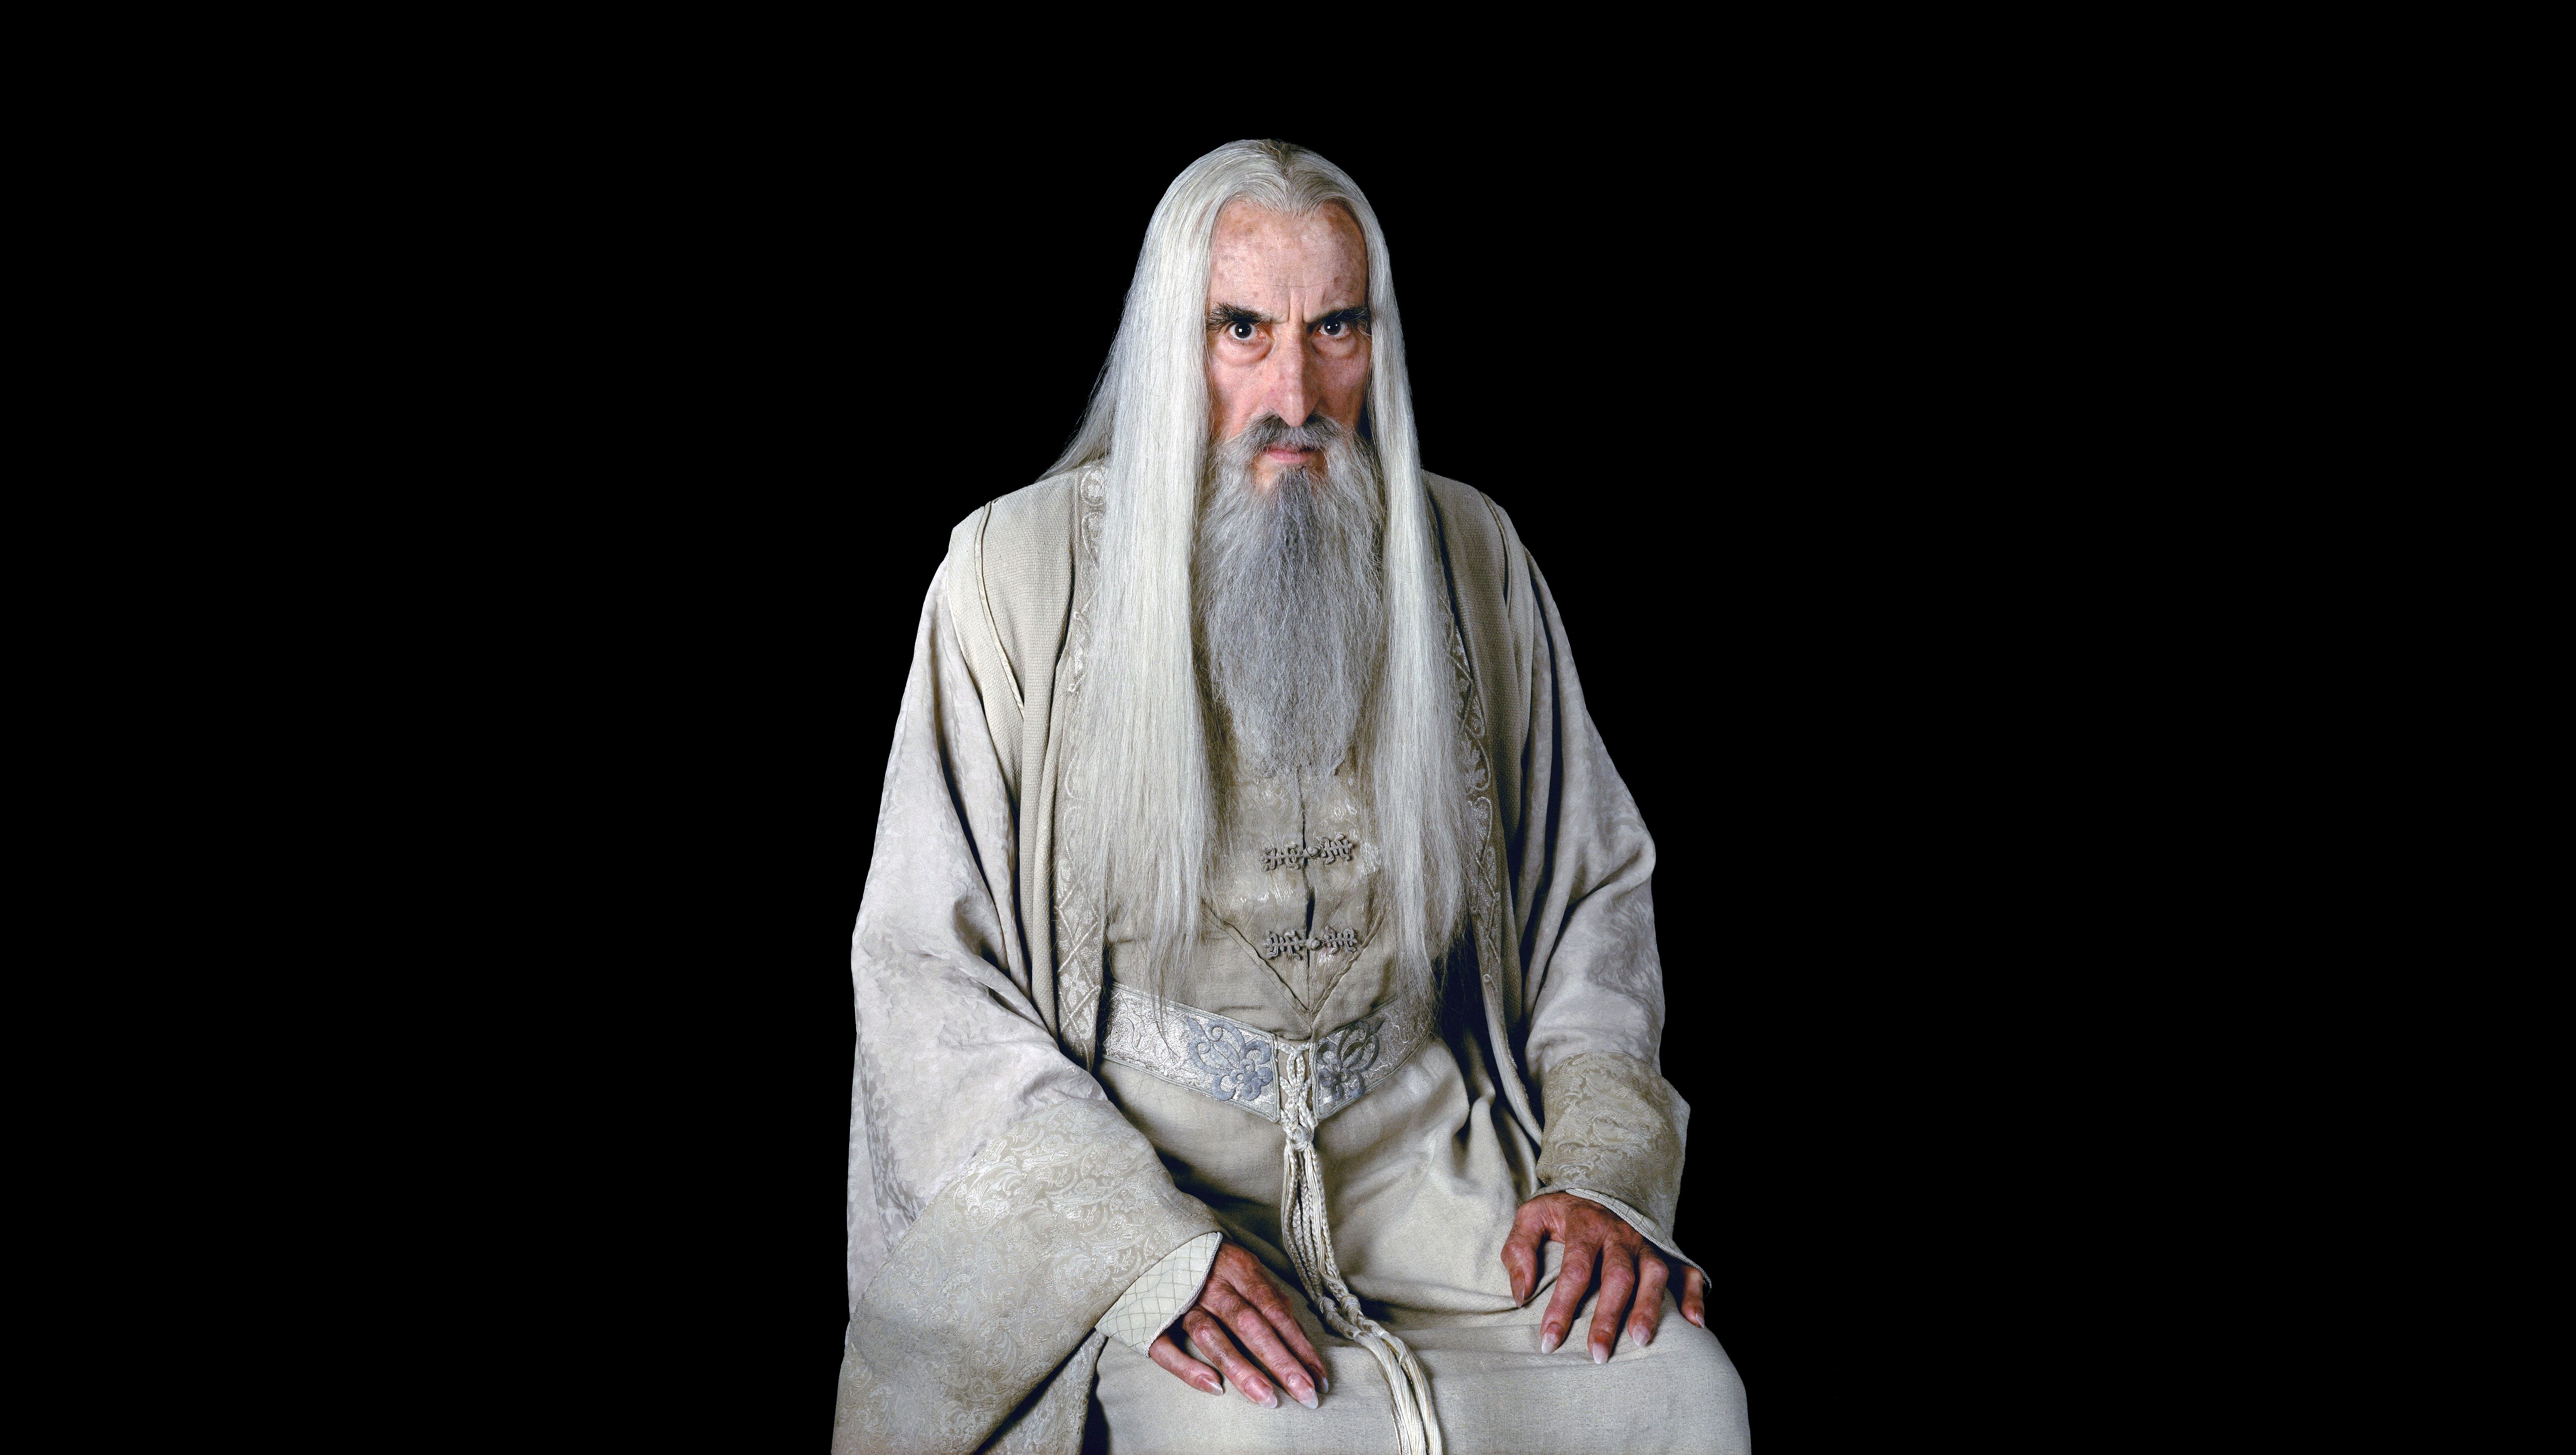 Download wallpaper the lord of the rings, Saruman, black, the Lord